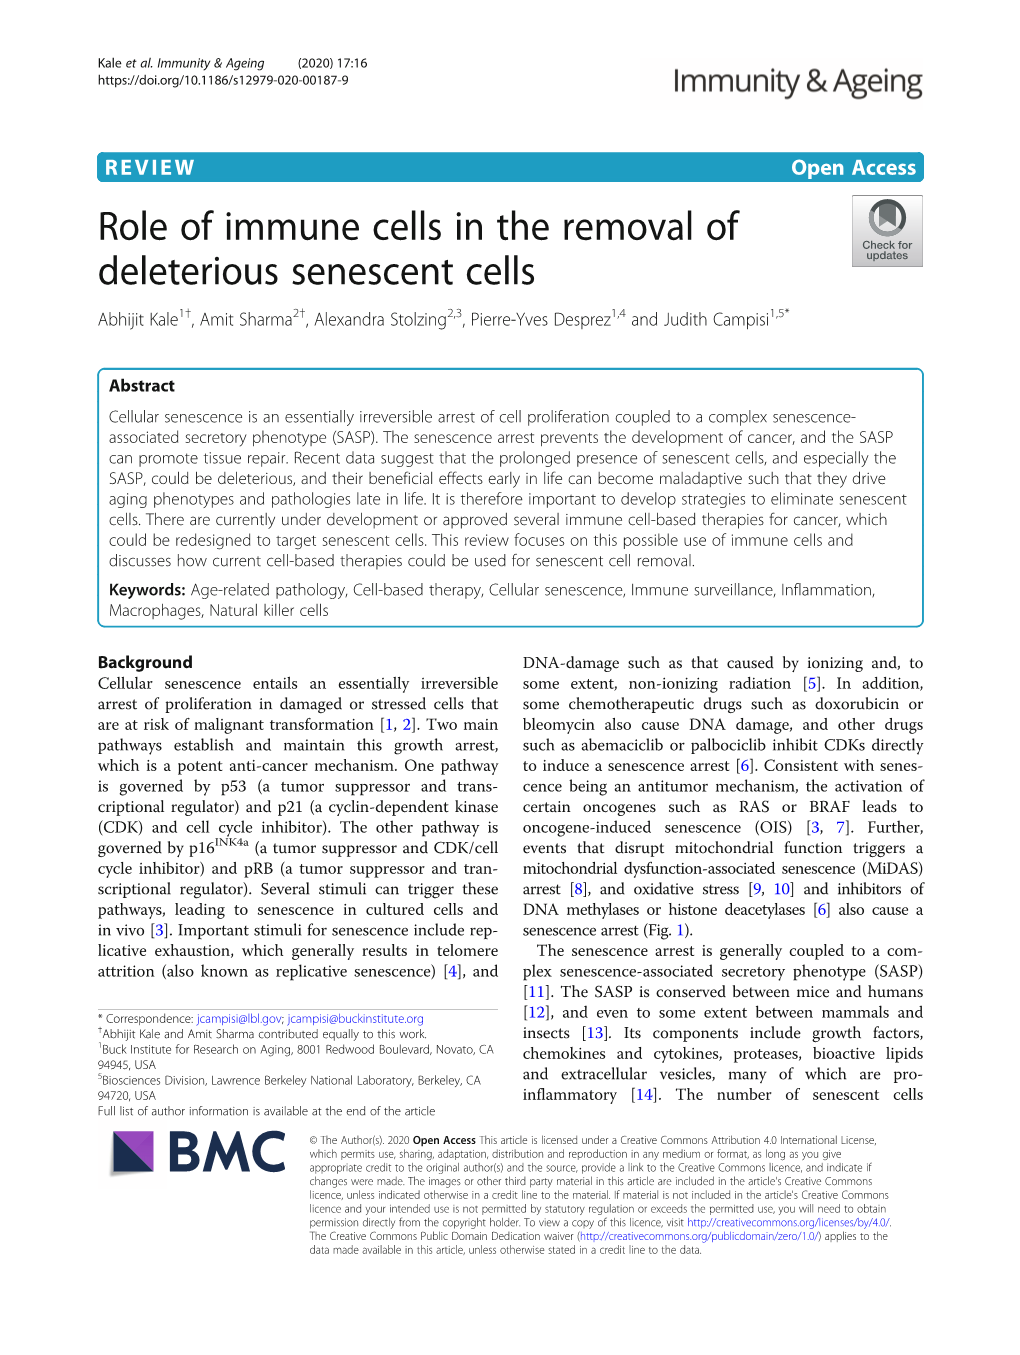 Role of Immune Cells in the Removal of Deleterious Senescent Cells Abhijit Kale1†, Amit Sharma2†, Alexandra Stolzing2,3, Pierre-Yves Desprez1,4 and Judith Campisi1,5*